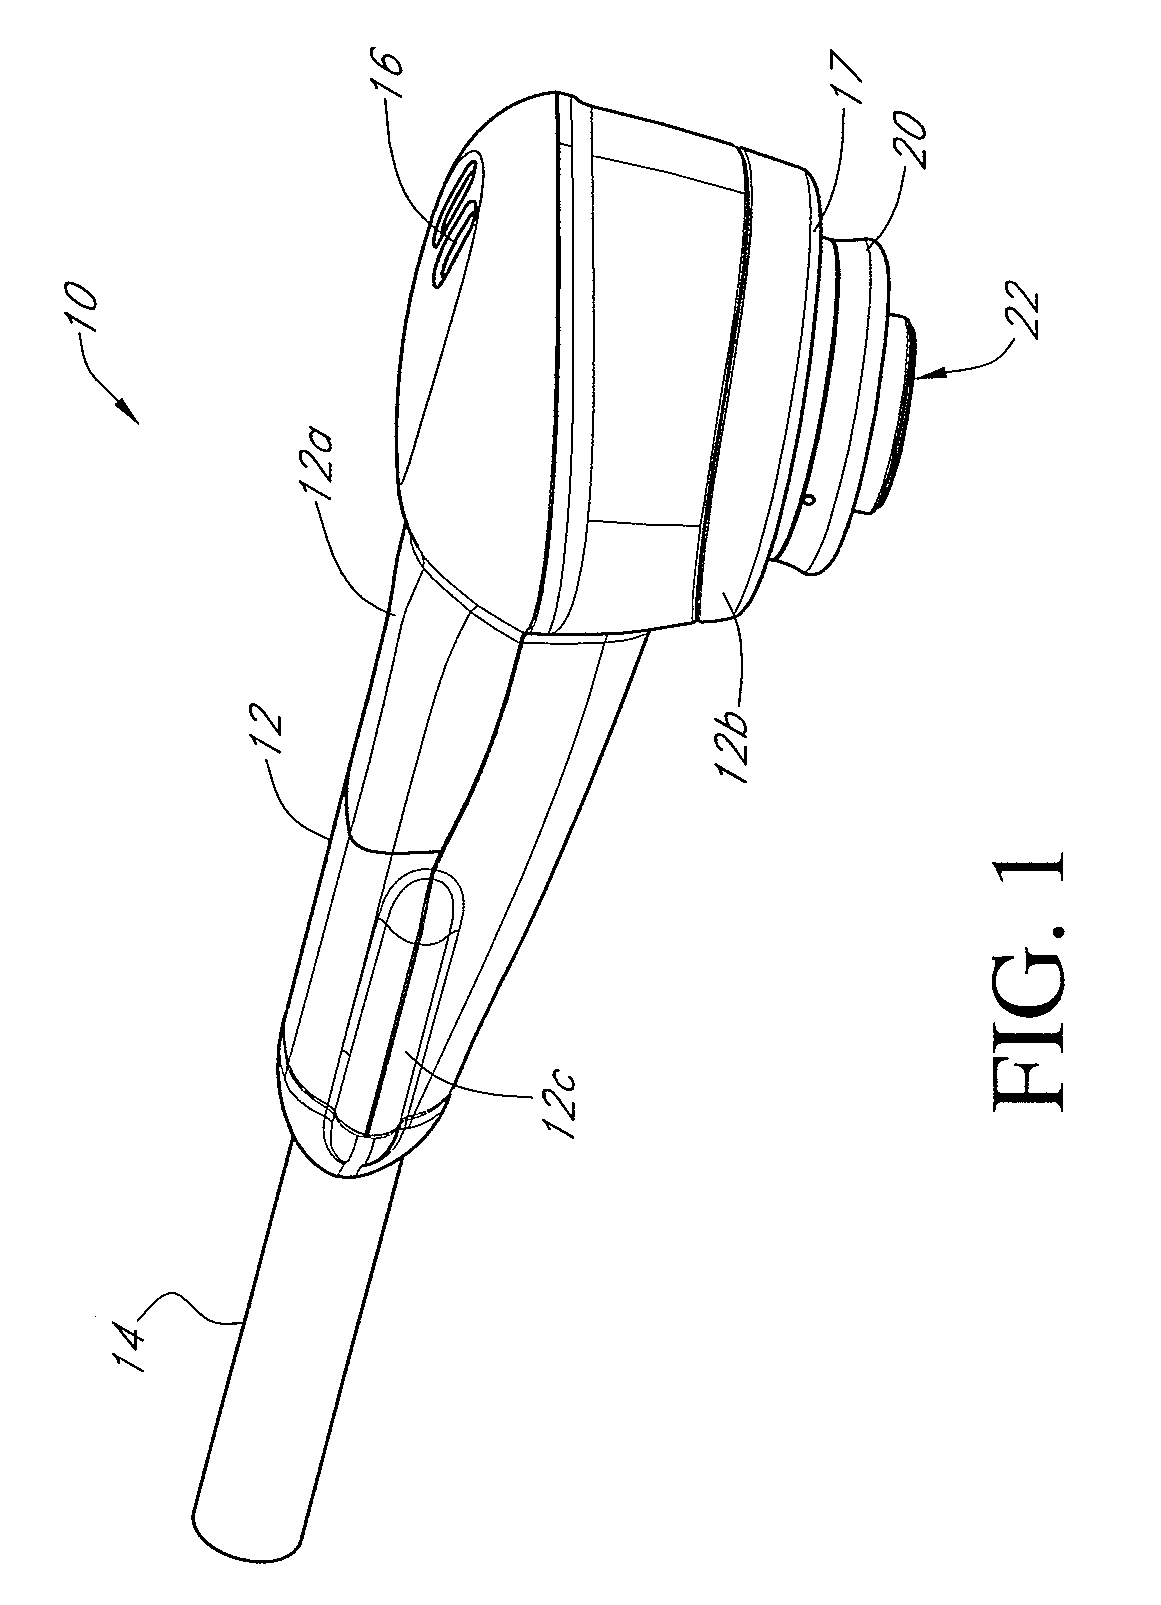 Method and apparatus for irradiating a surface with pulsed light